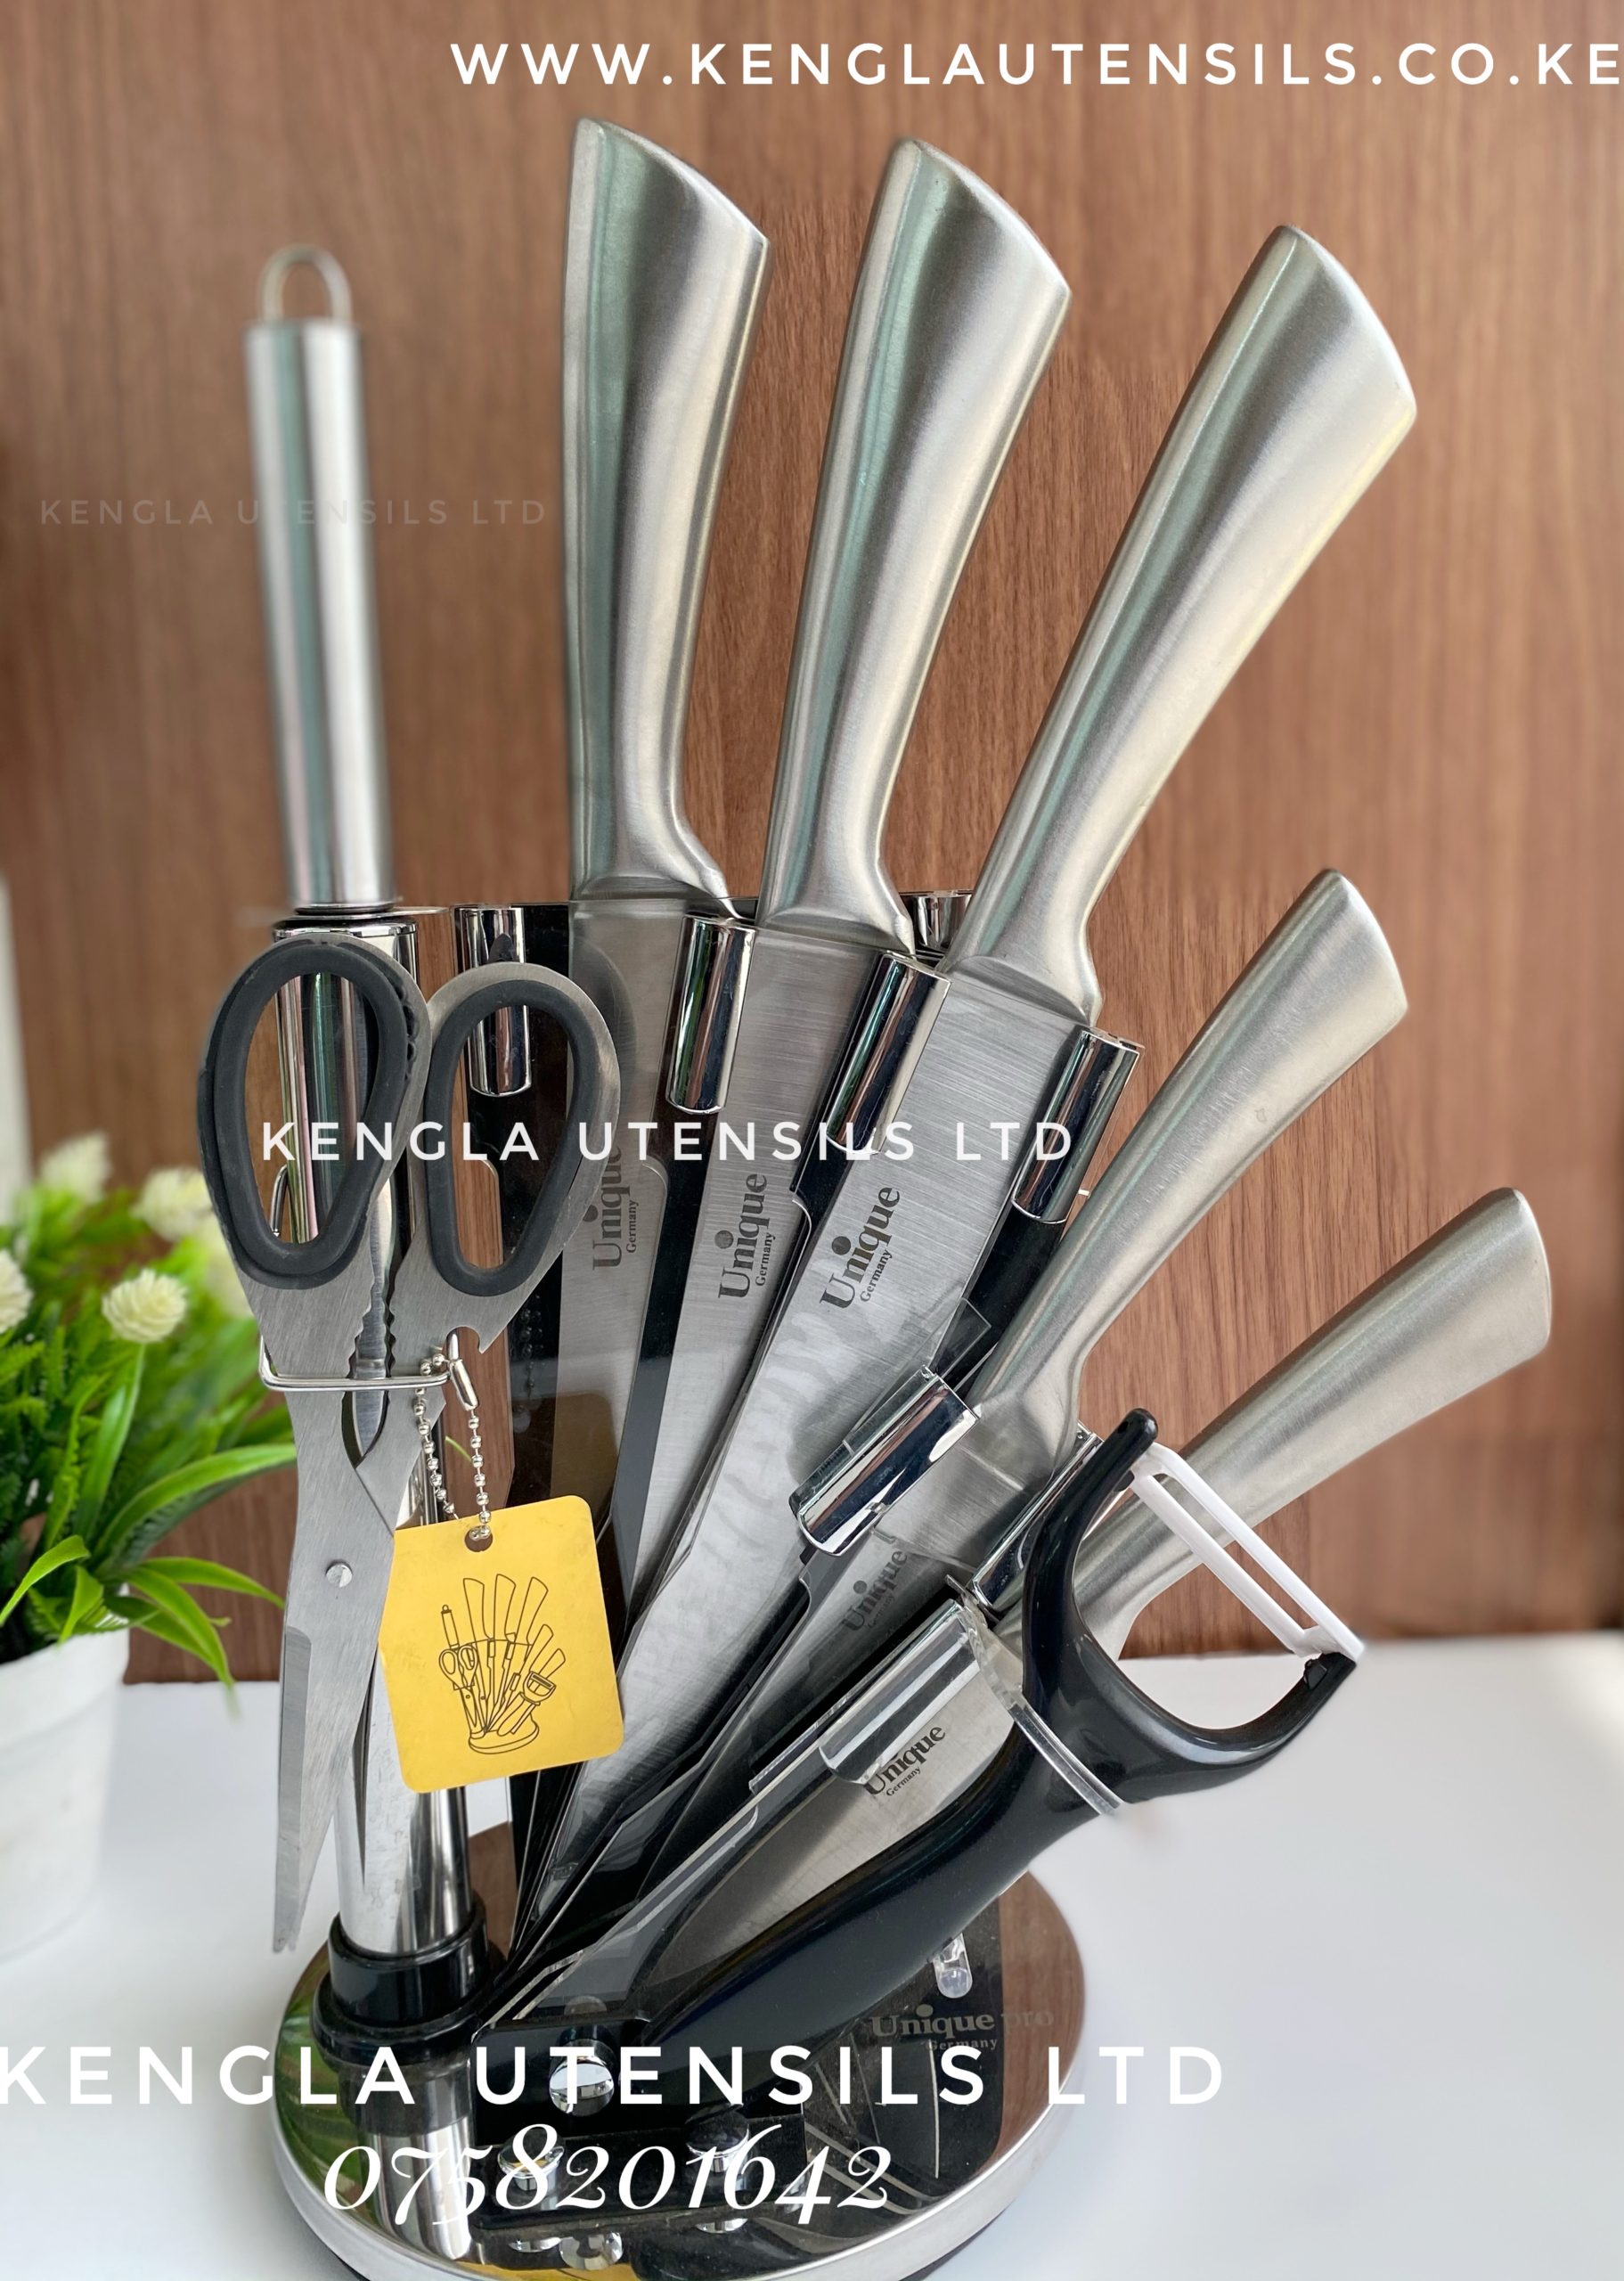 19pcs Kitchen Utensils And Knife Set With Block, Including 9pcs